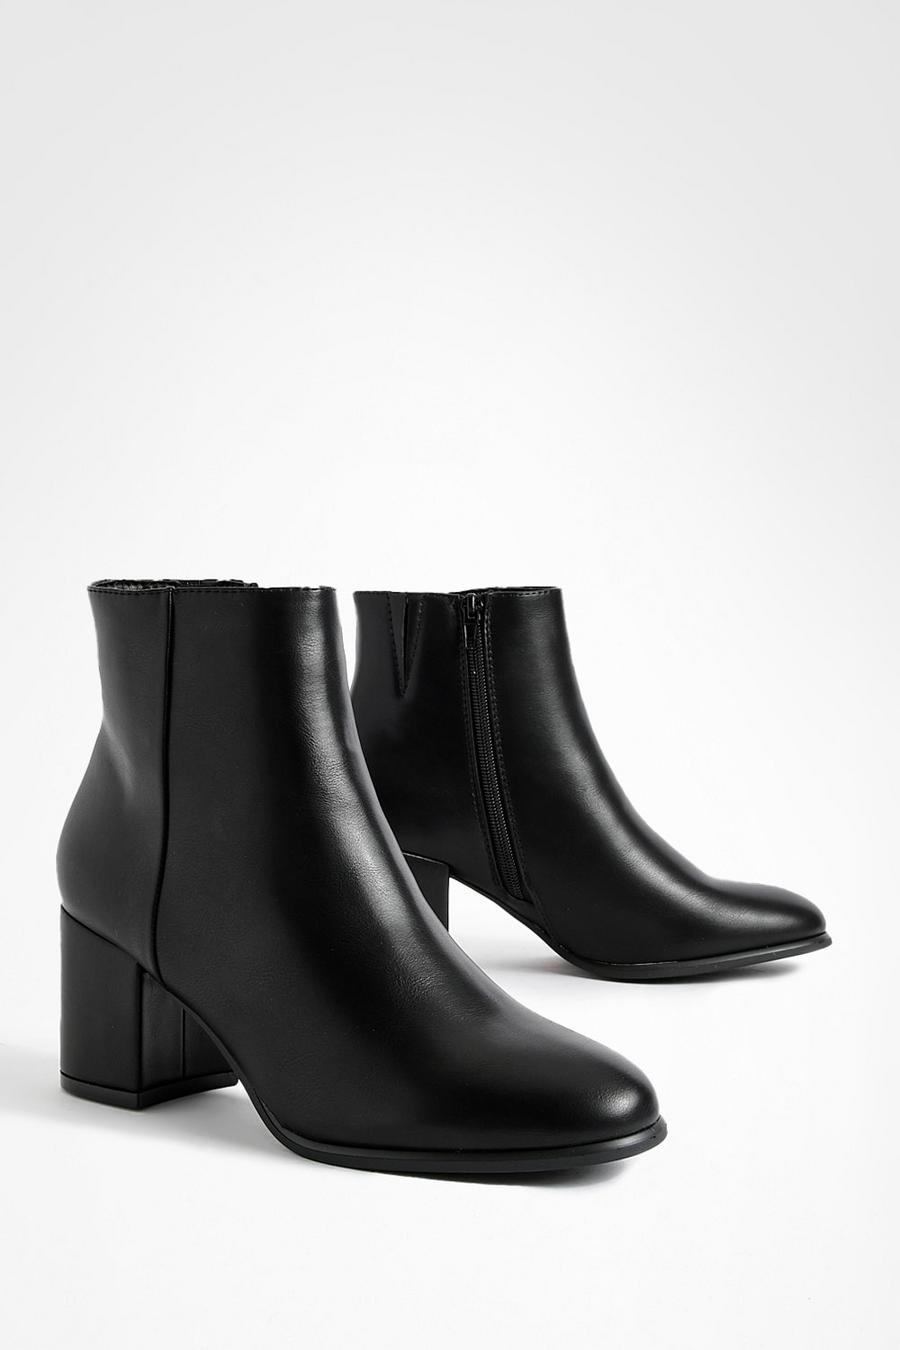 black heeled ankle boots sale